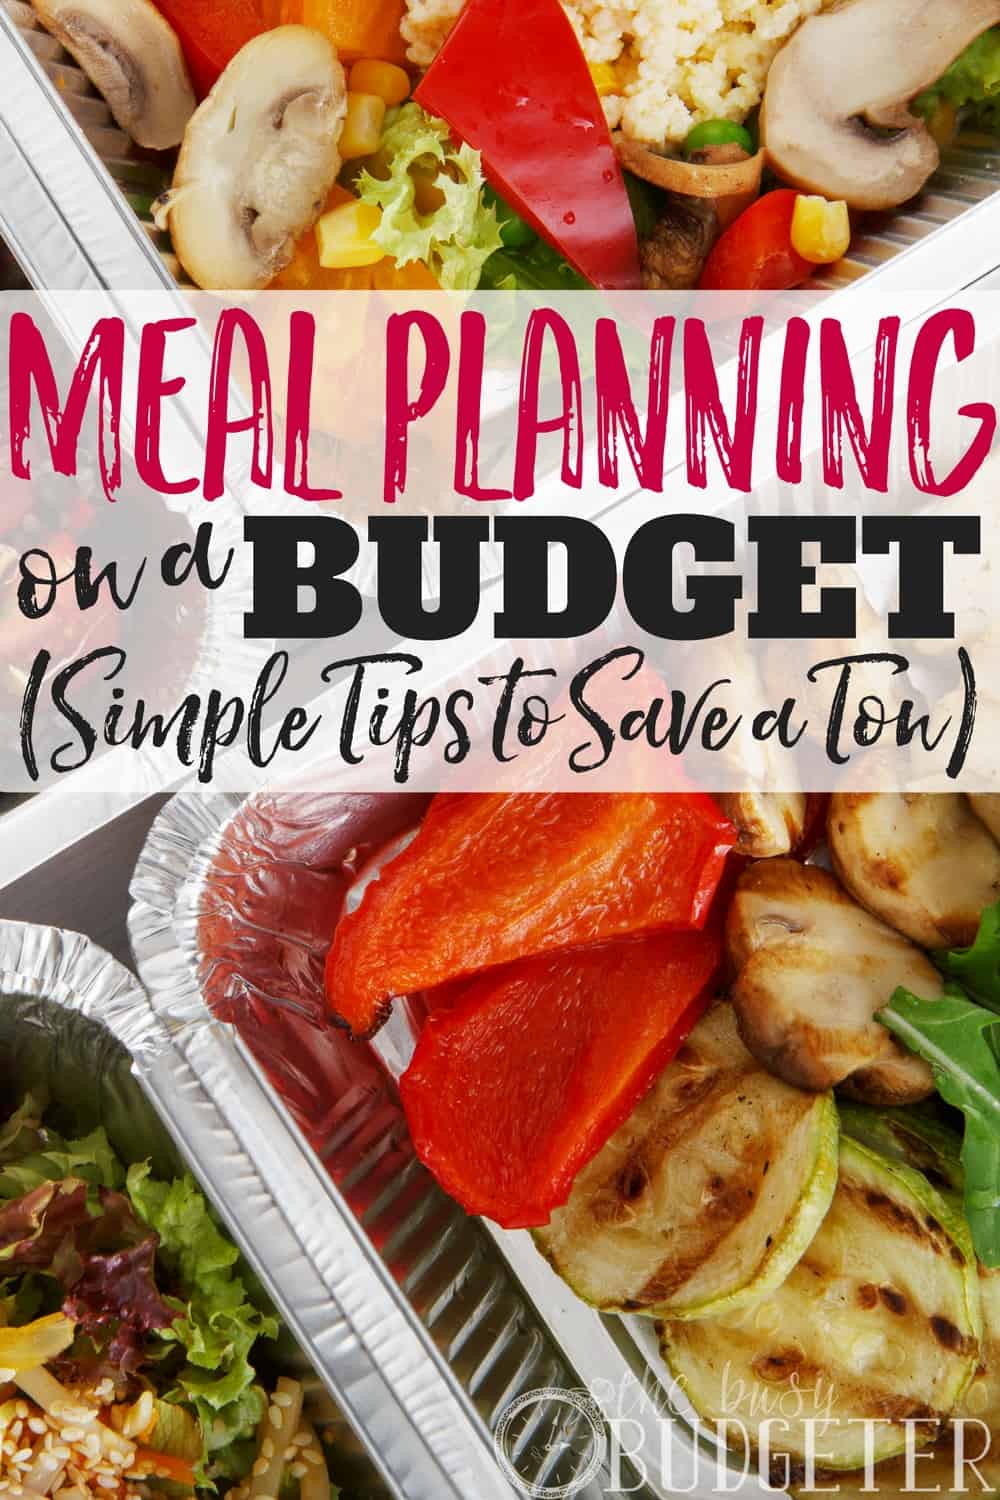 I have always struggled with meal planning on a budget but this article gives some amazing resources for how easily to save money! Now THAT is a huge mom win for sure!